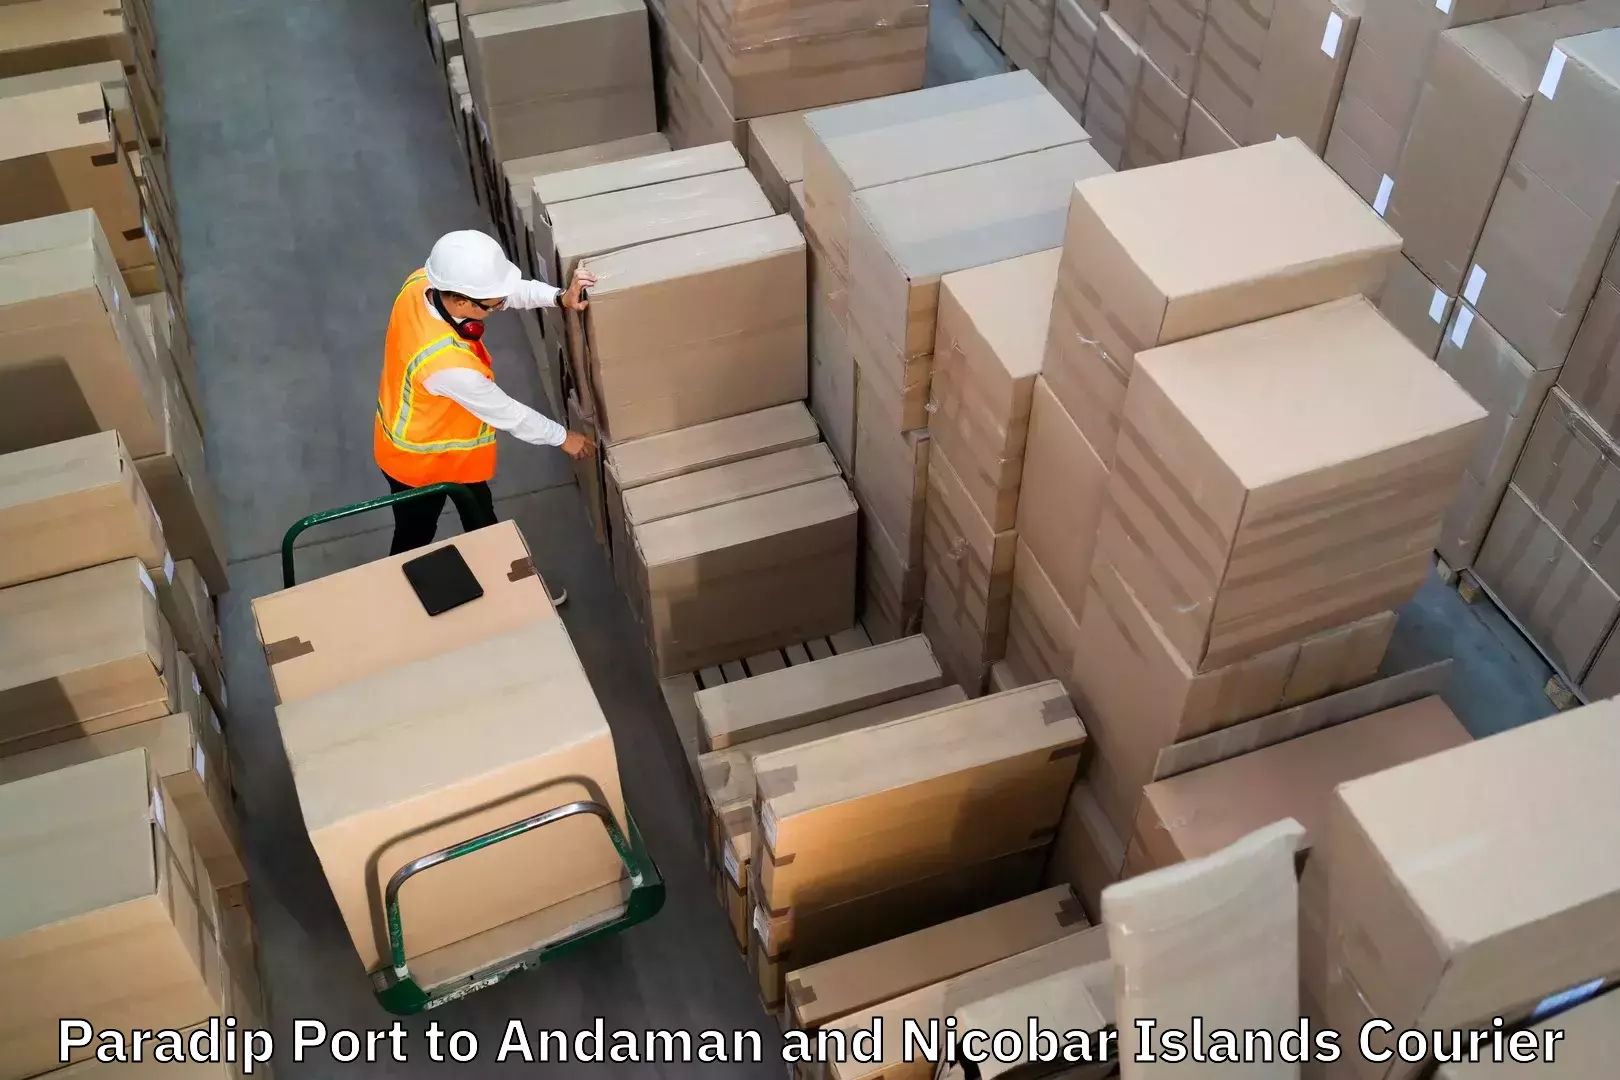 Hassle-free luggage shipping Paradip Port to Port Blair